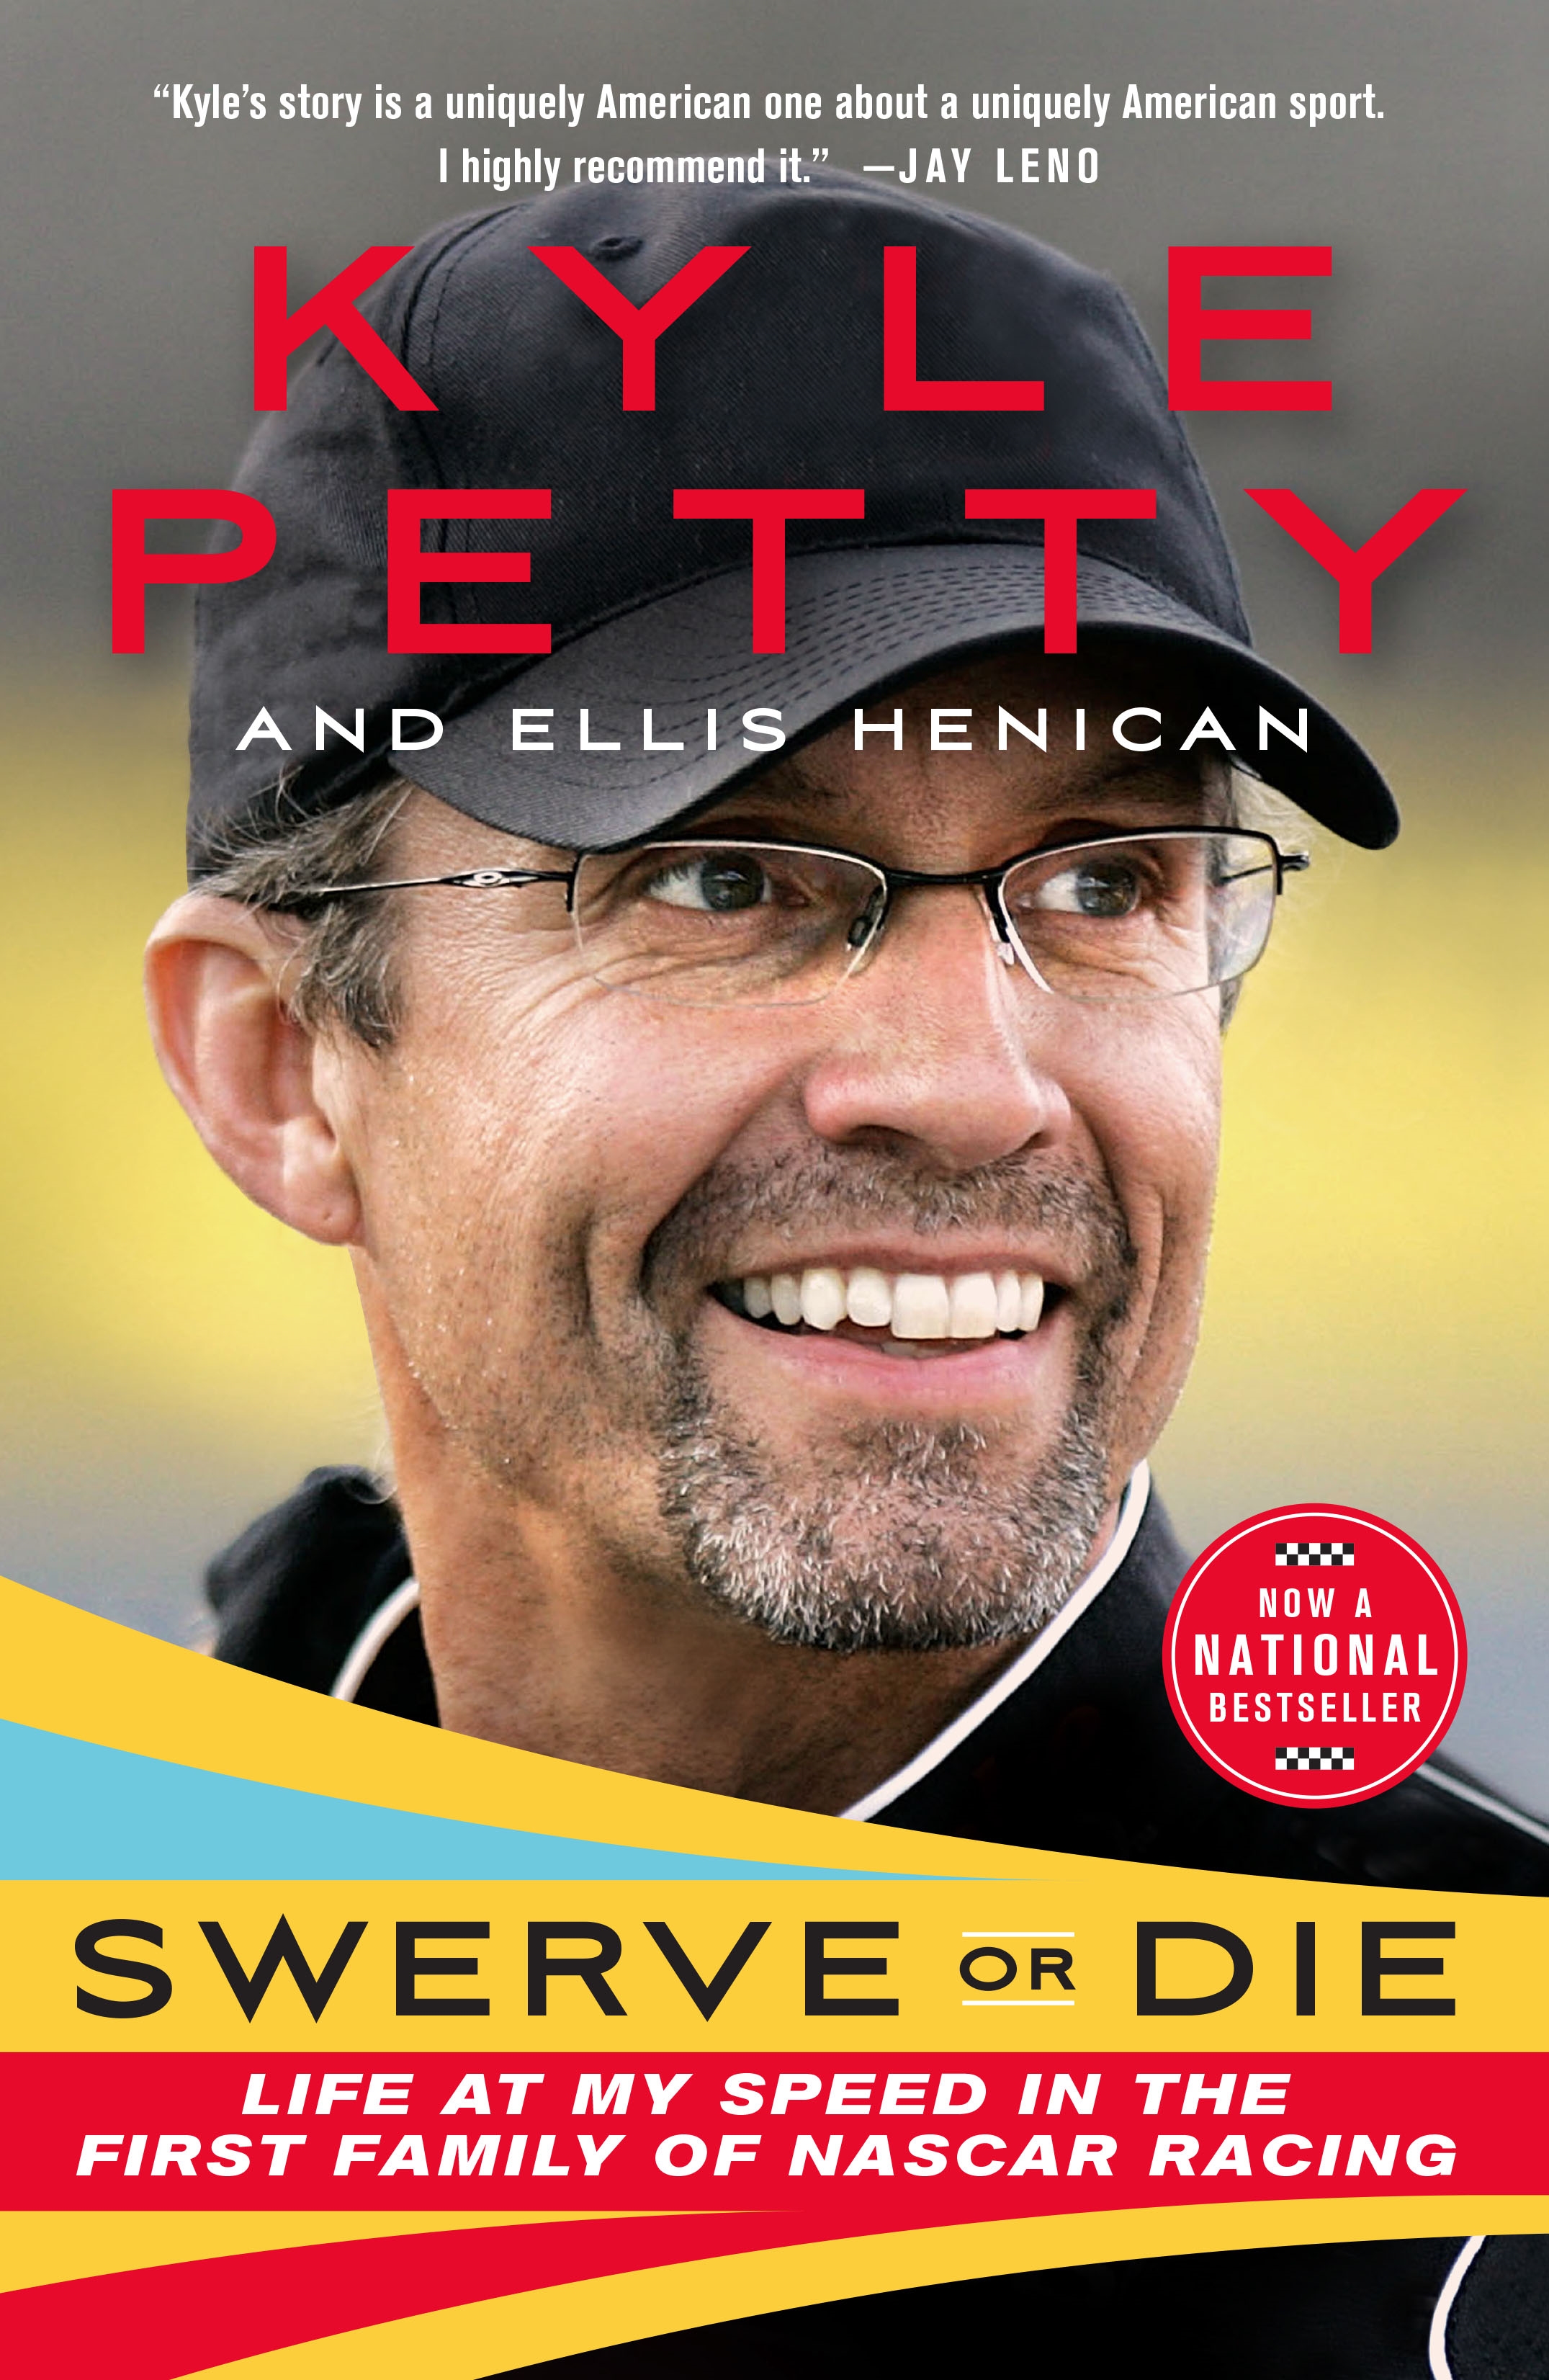 Umschlagbild für Swerve or Die [electronic resource] : Life at My Speed in the First Family of NASCAR Racing